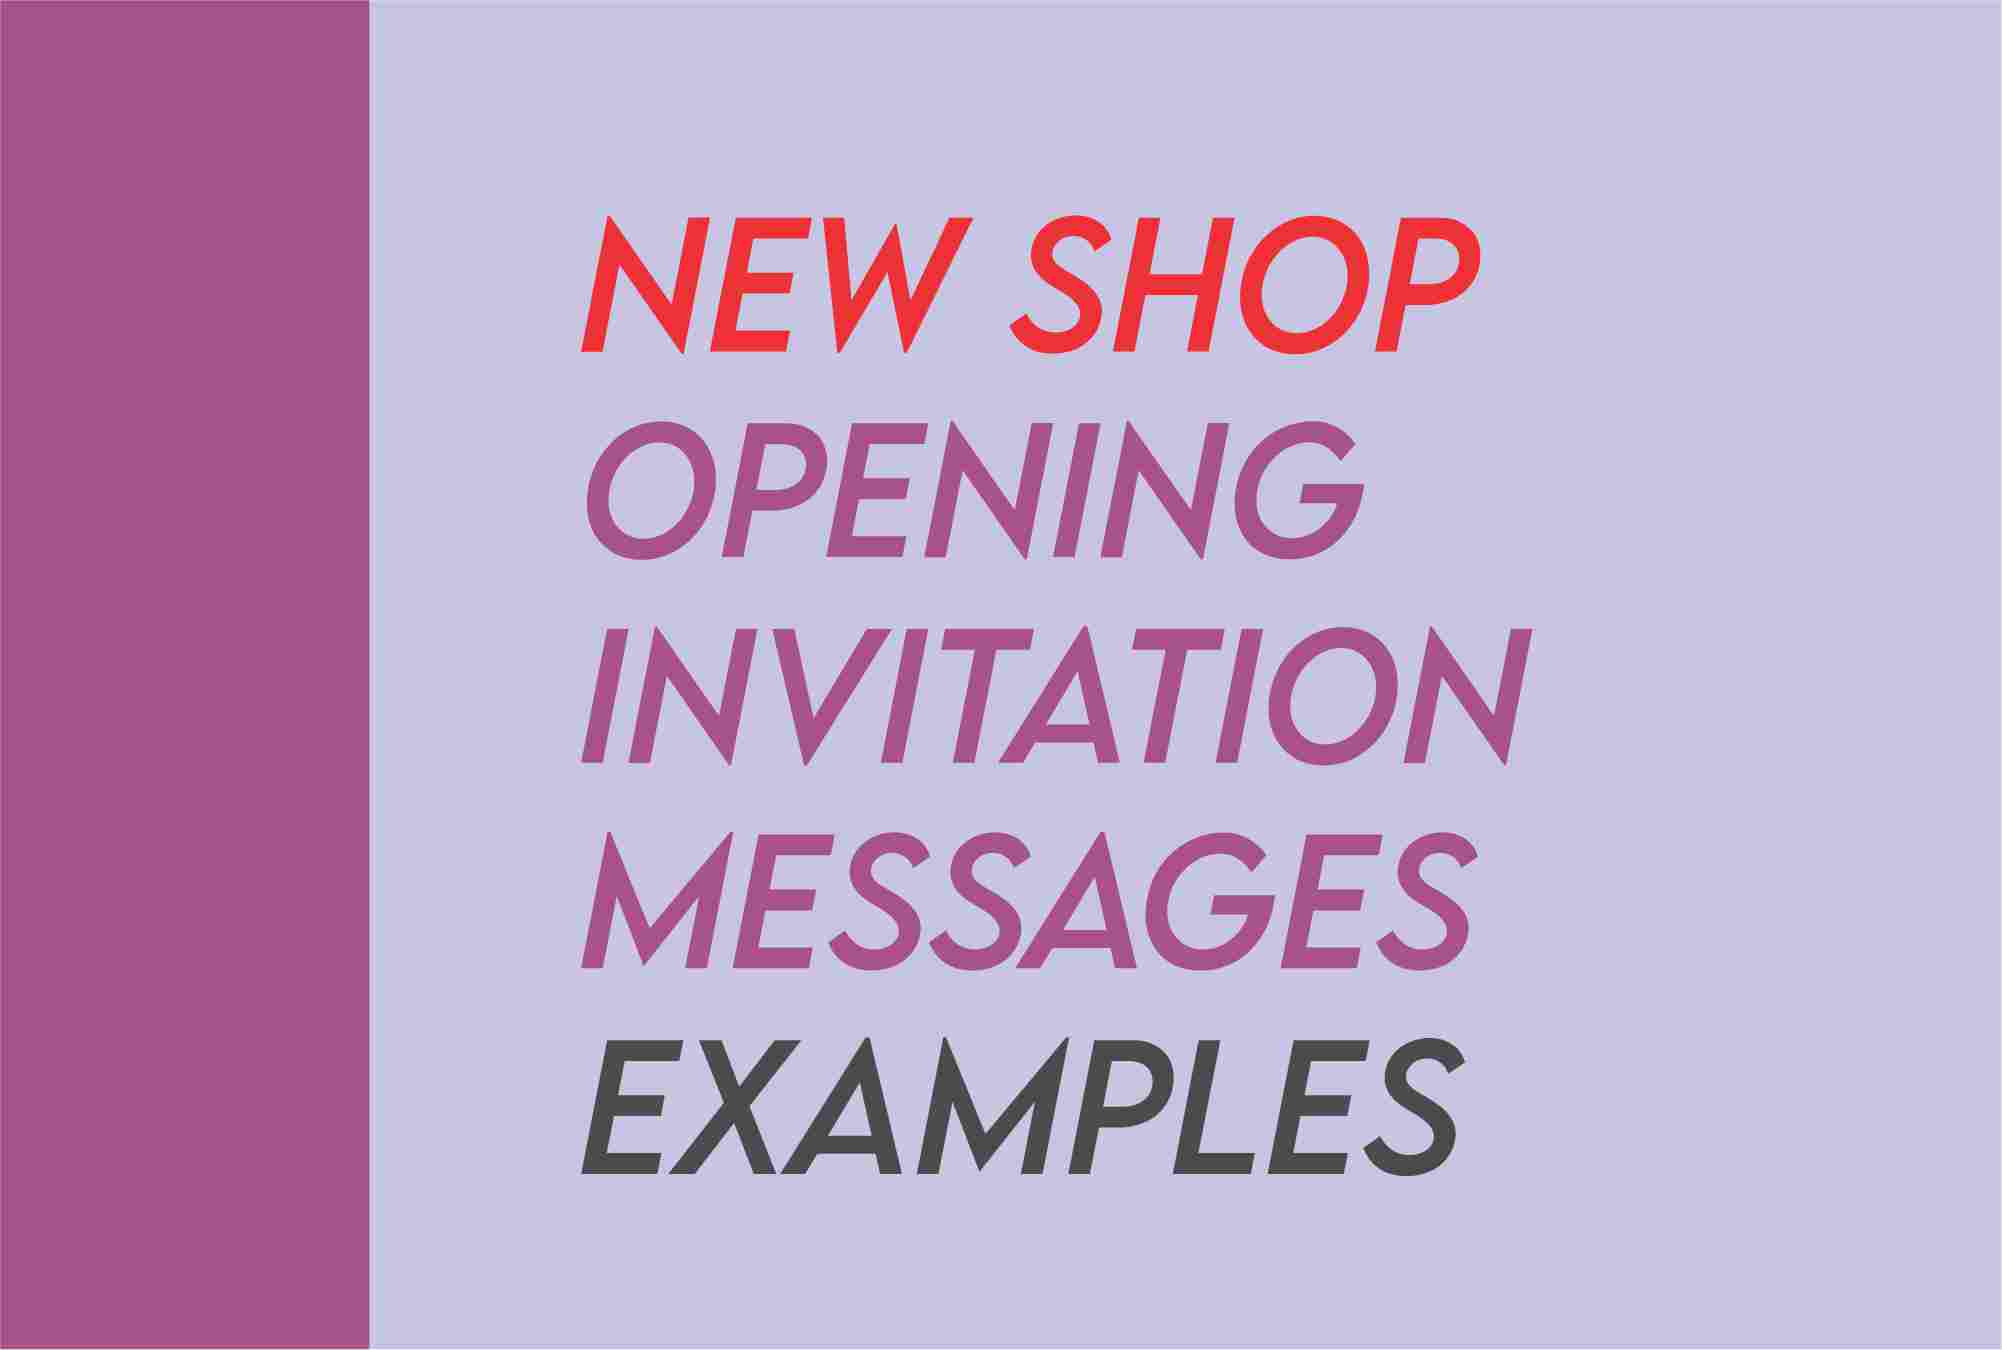 New Shop Opening Invitation Message